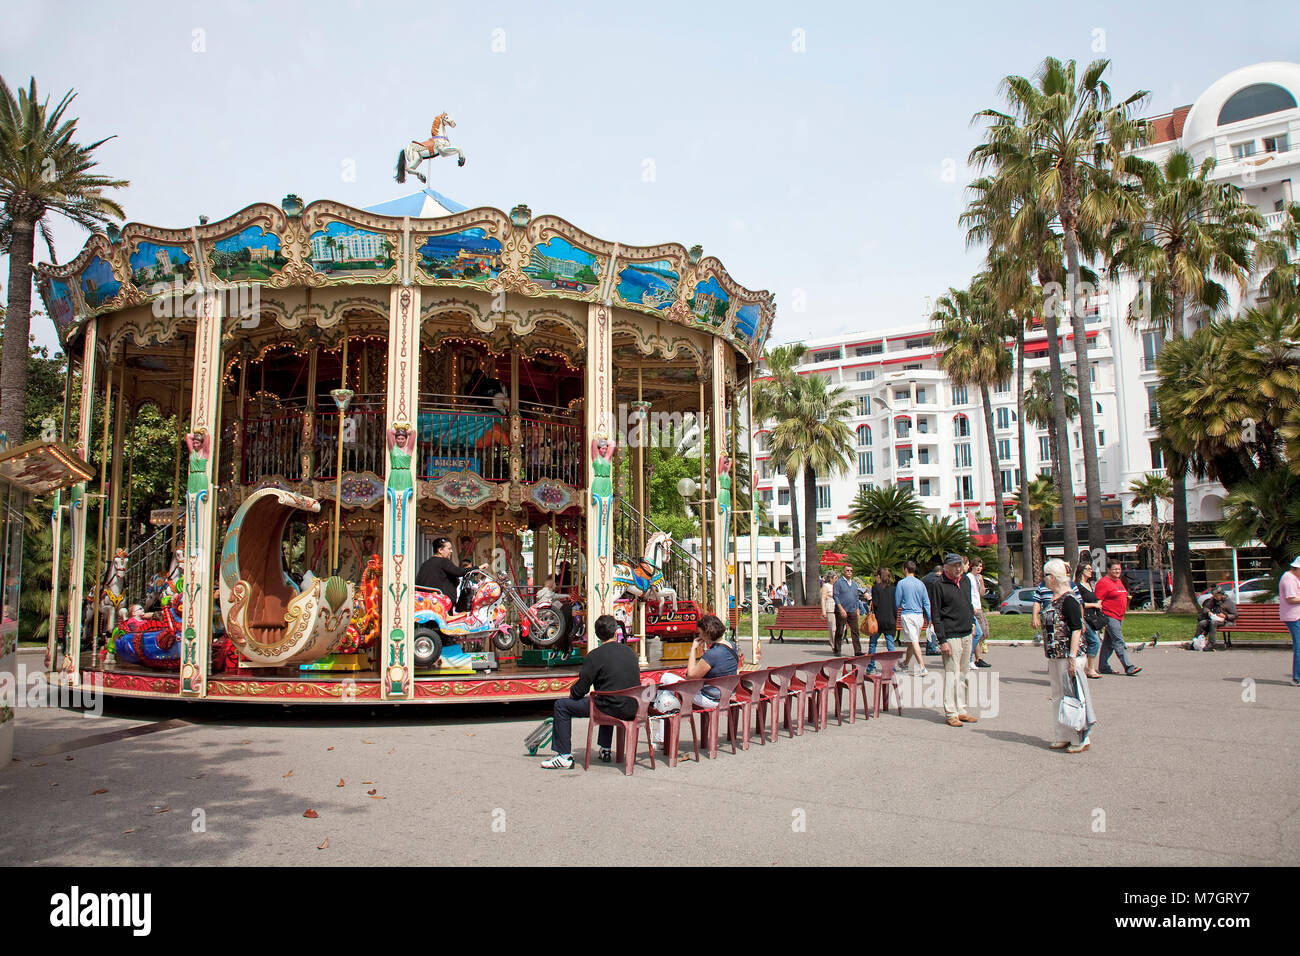 Historical children's merry-go-round at Boulevard La Croisette, Cannes, french riviera, South France, France, Europe Stock Photo